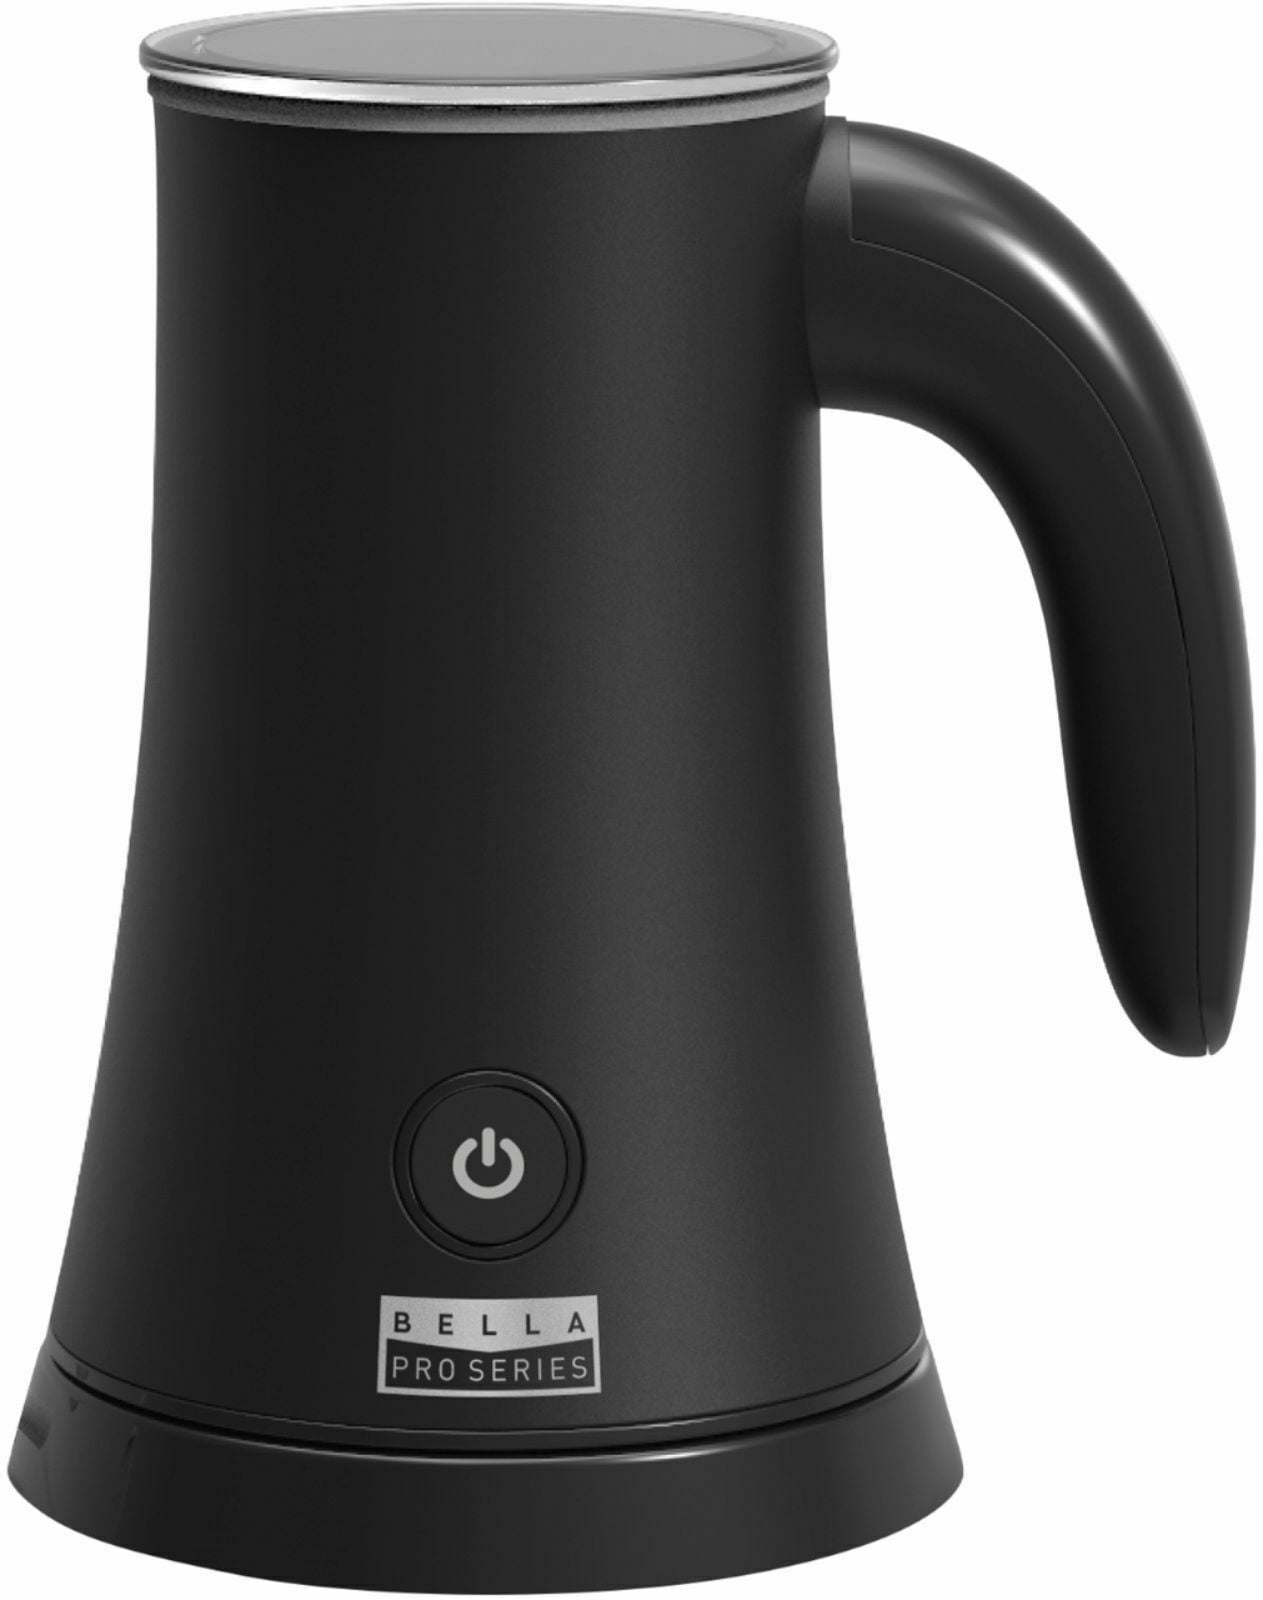 Bella Pro Series Coffee Maker Just $39.99 Shipped (Reg. $80), Uses K-Cups  & Ground Coffee!